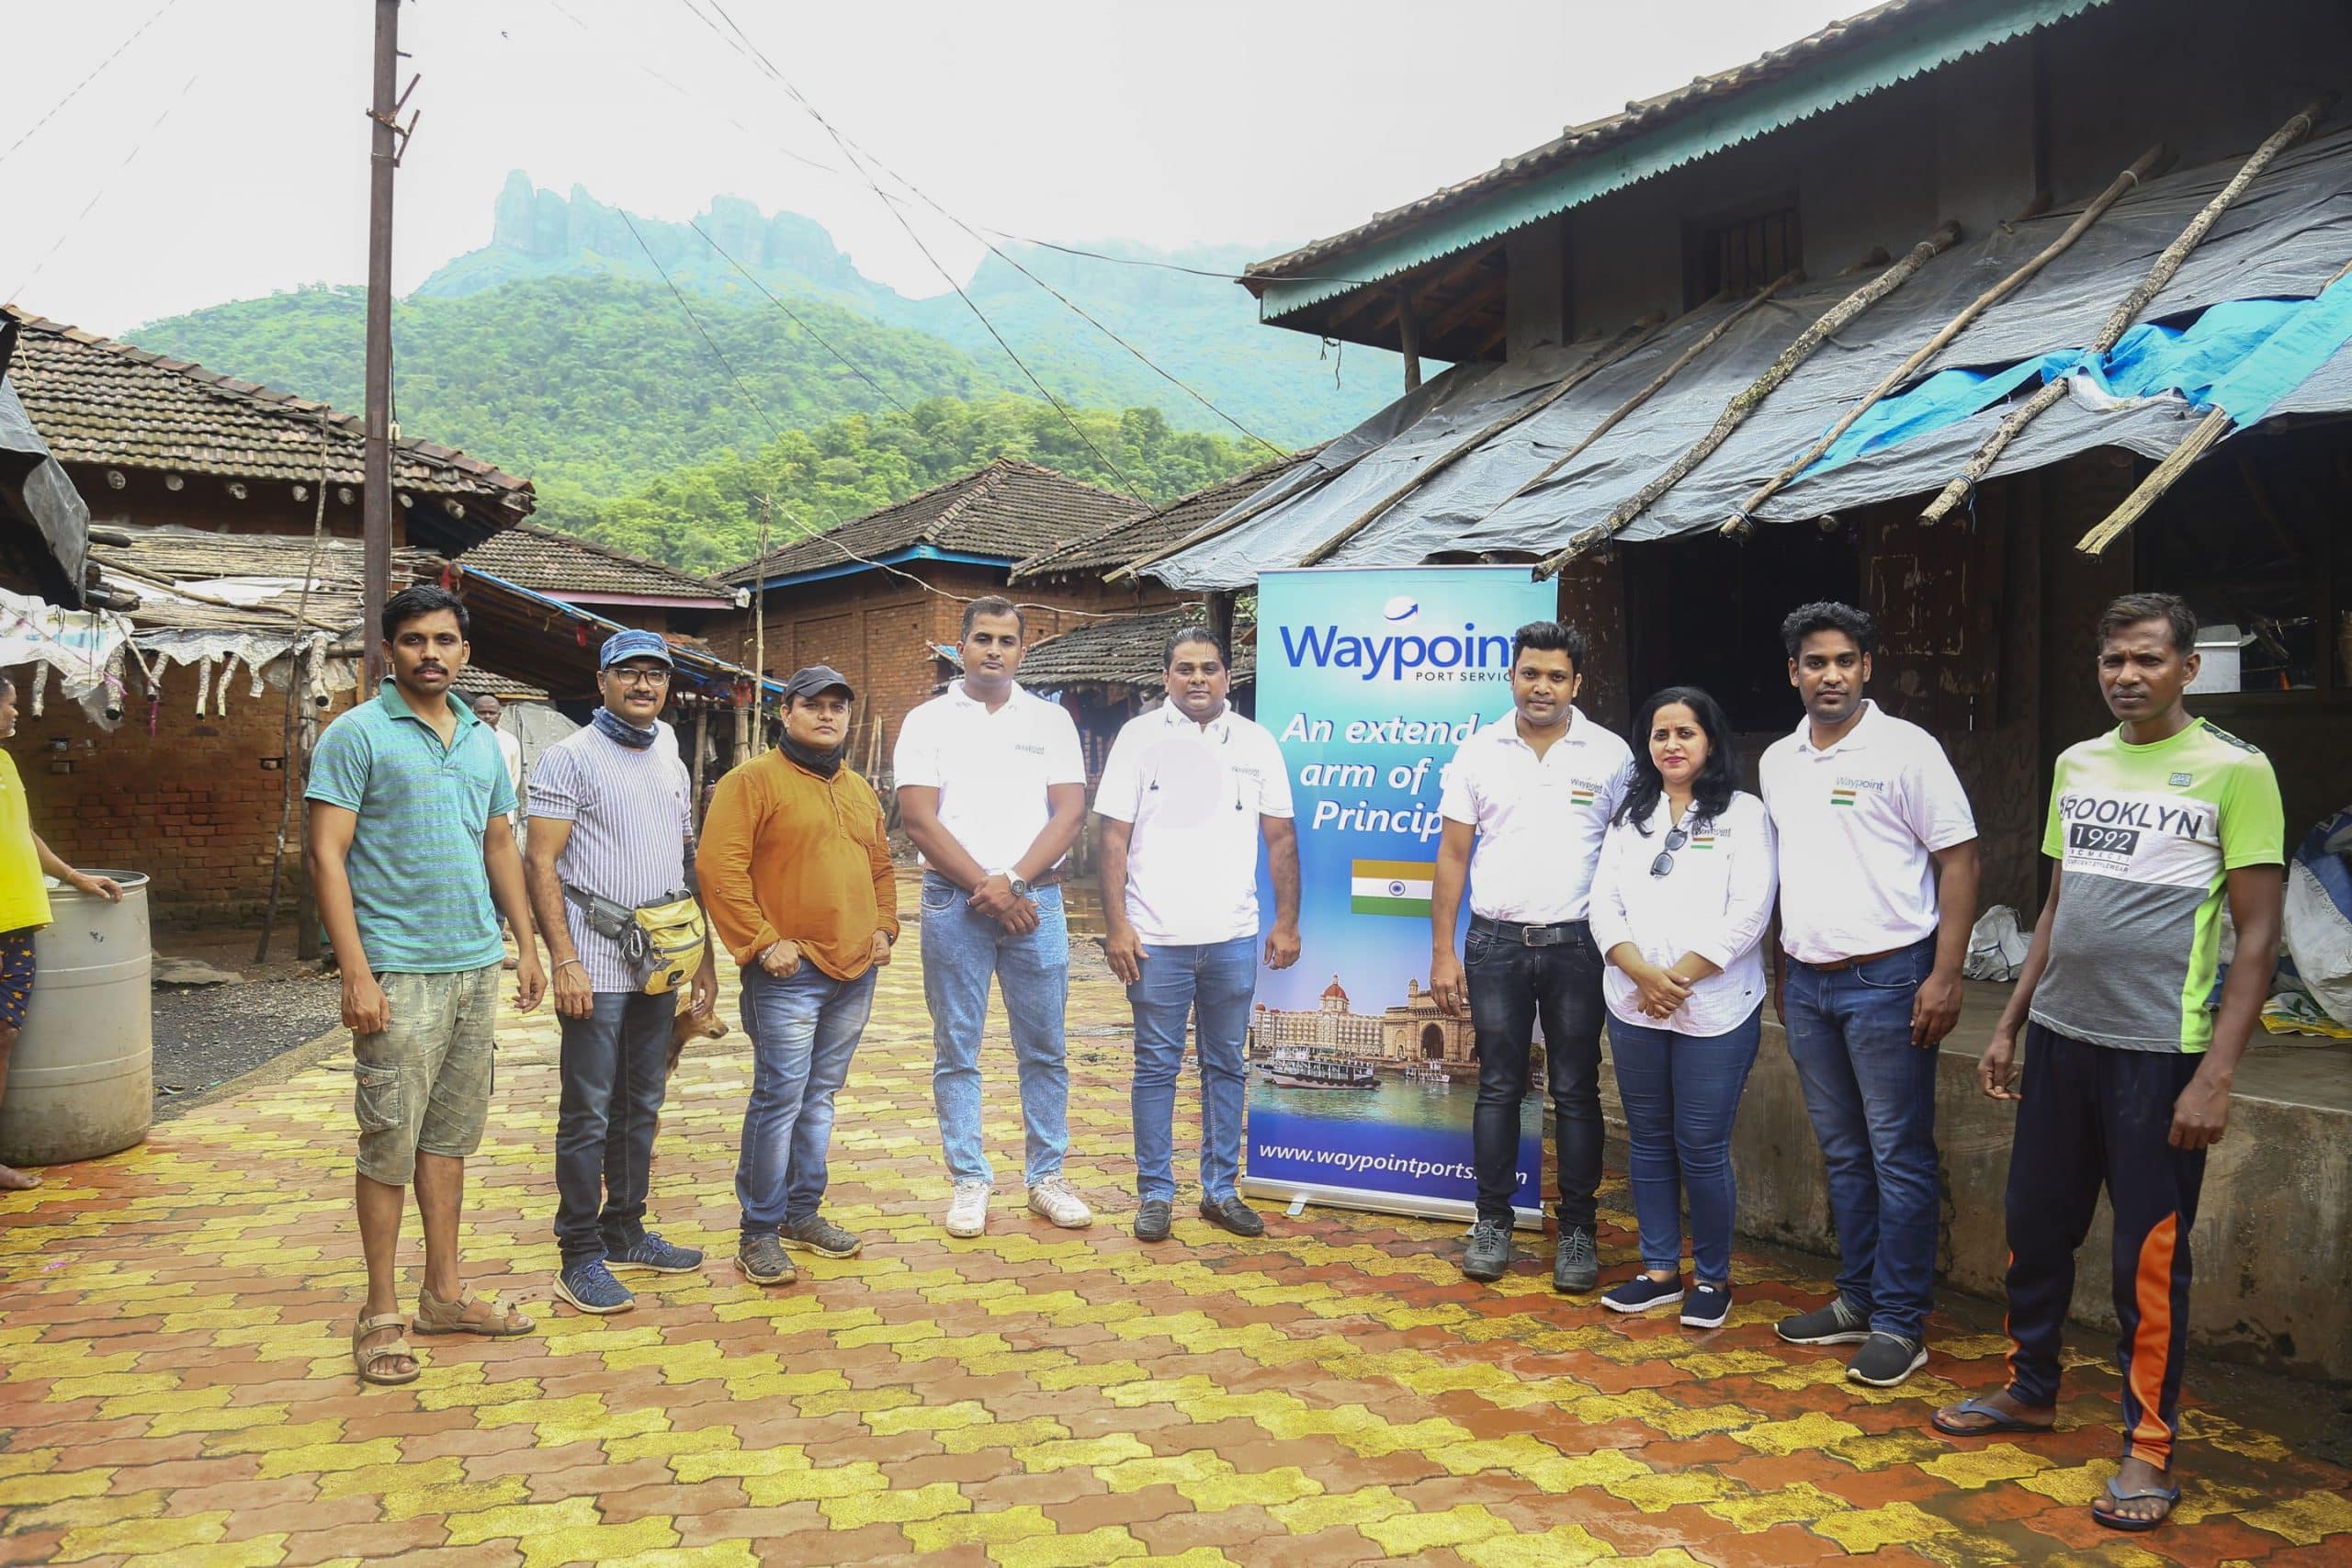 Waypoint India – Swapping a Celebratory Party, to helping others